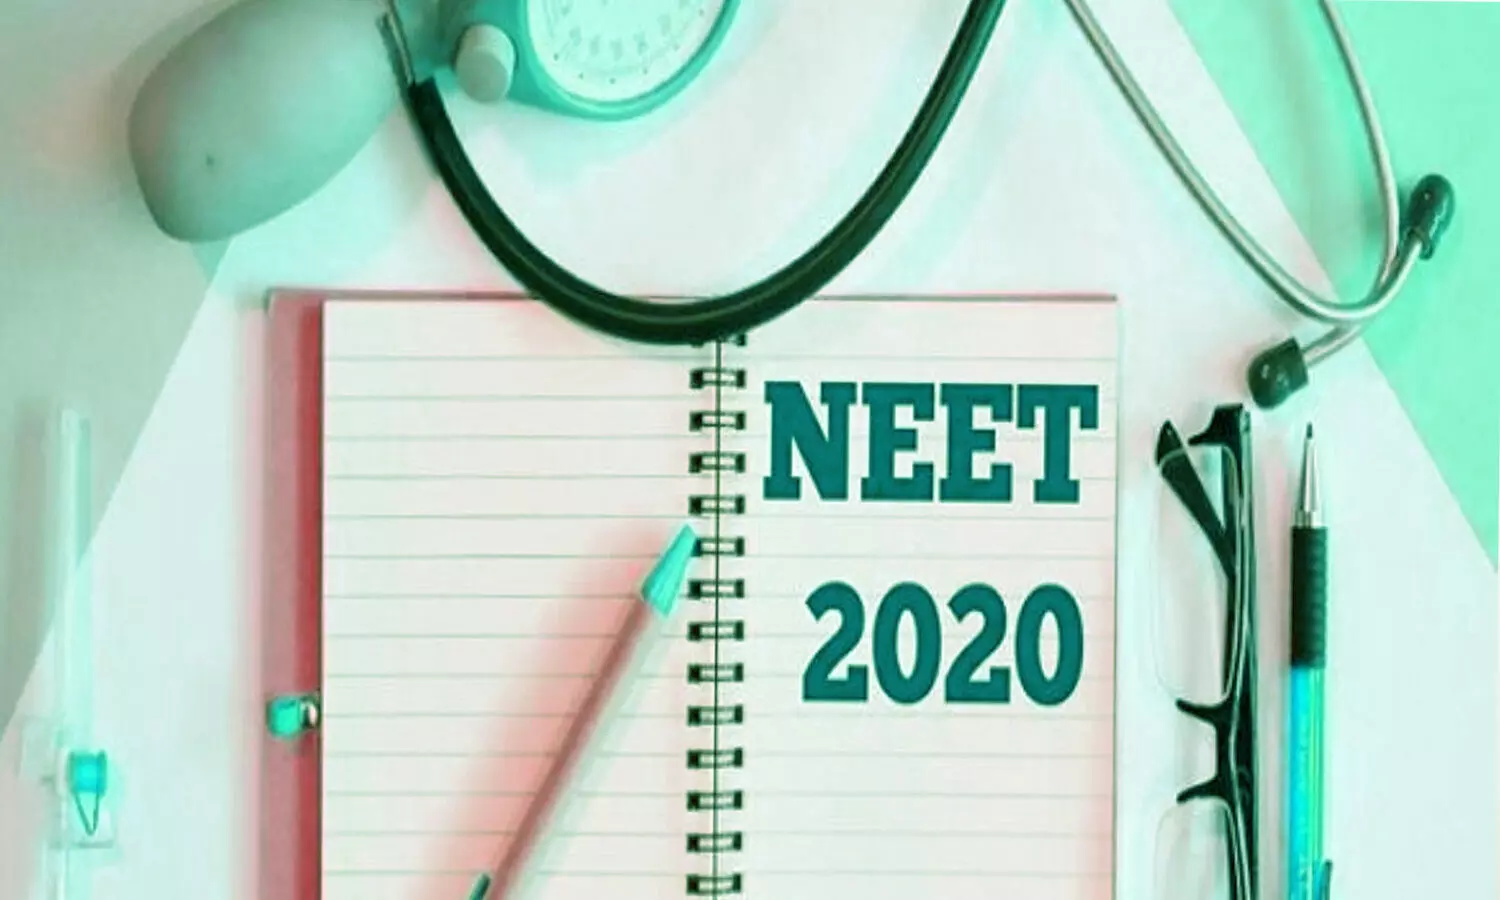 NEET 2020: NTA releases Advisory on COVID-19 for All Functionaries